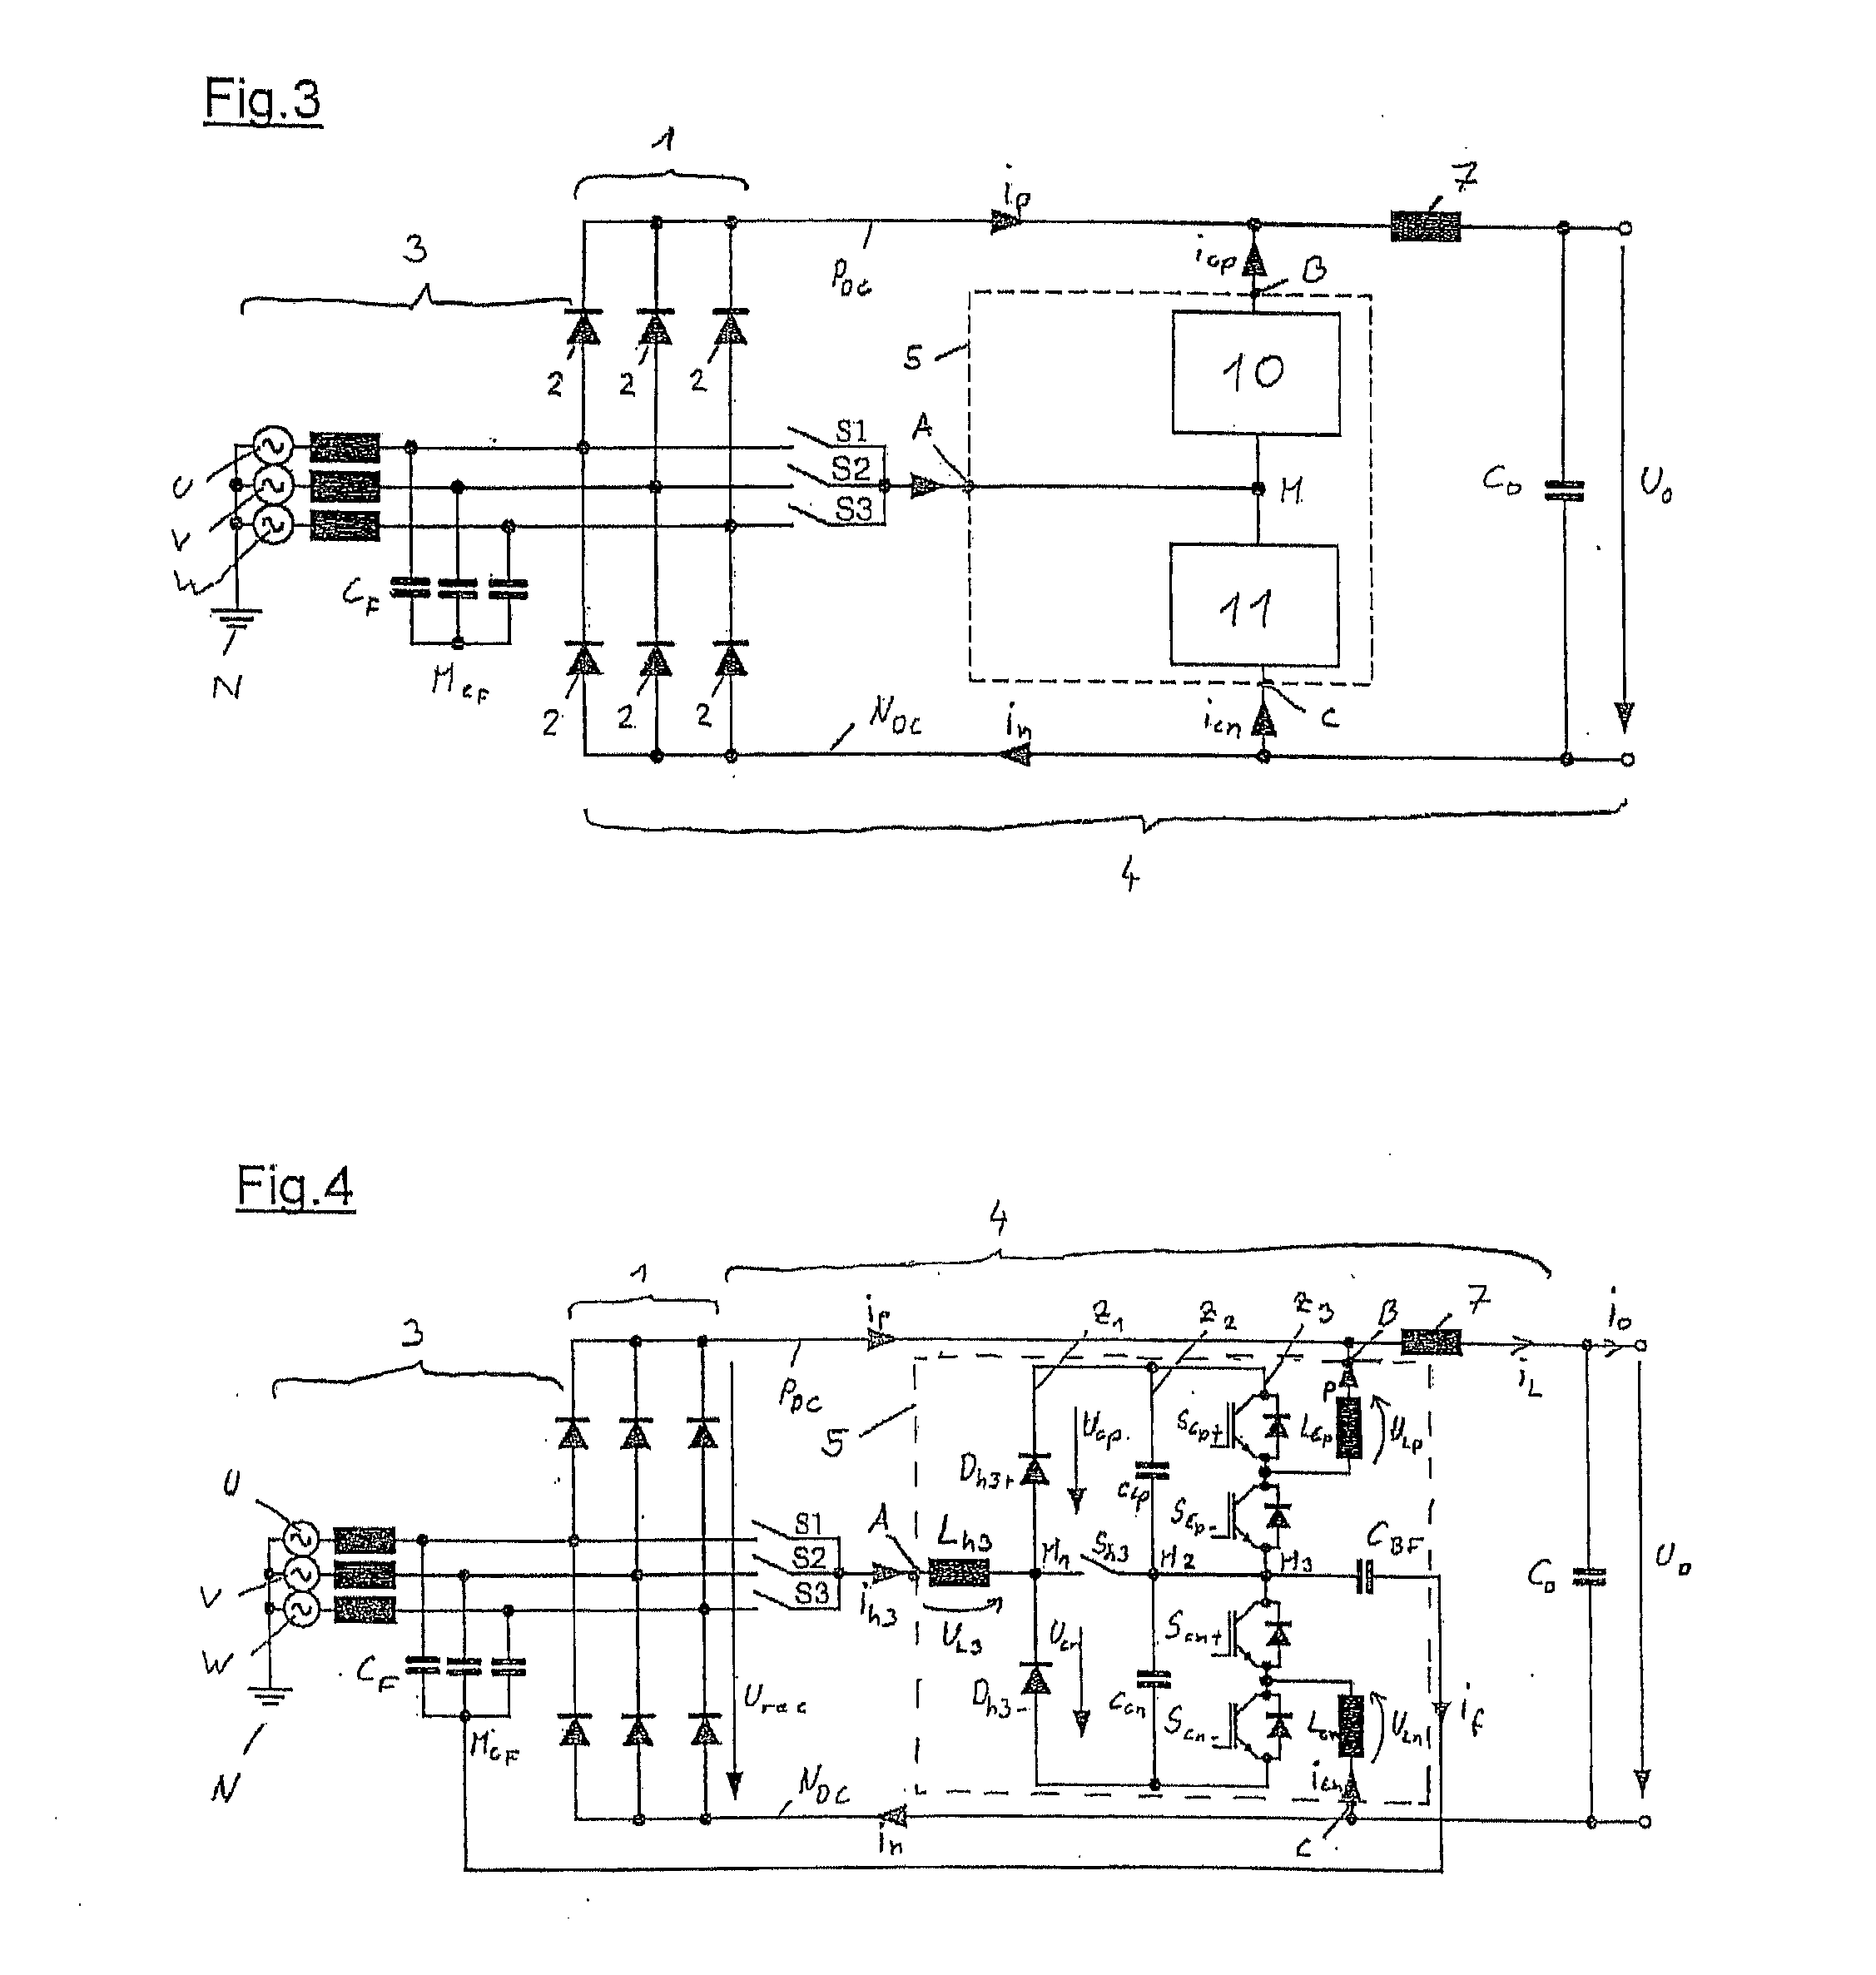 Rectifier circuit with current injection